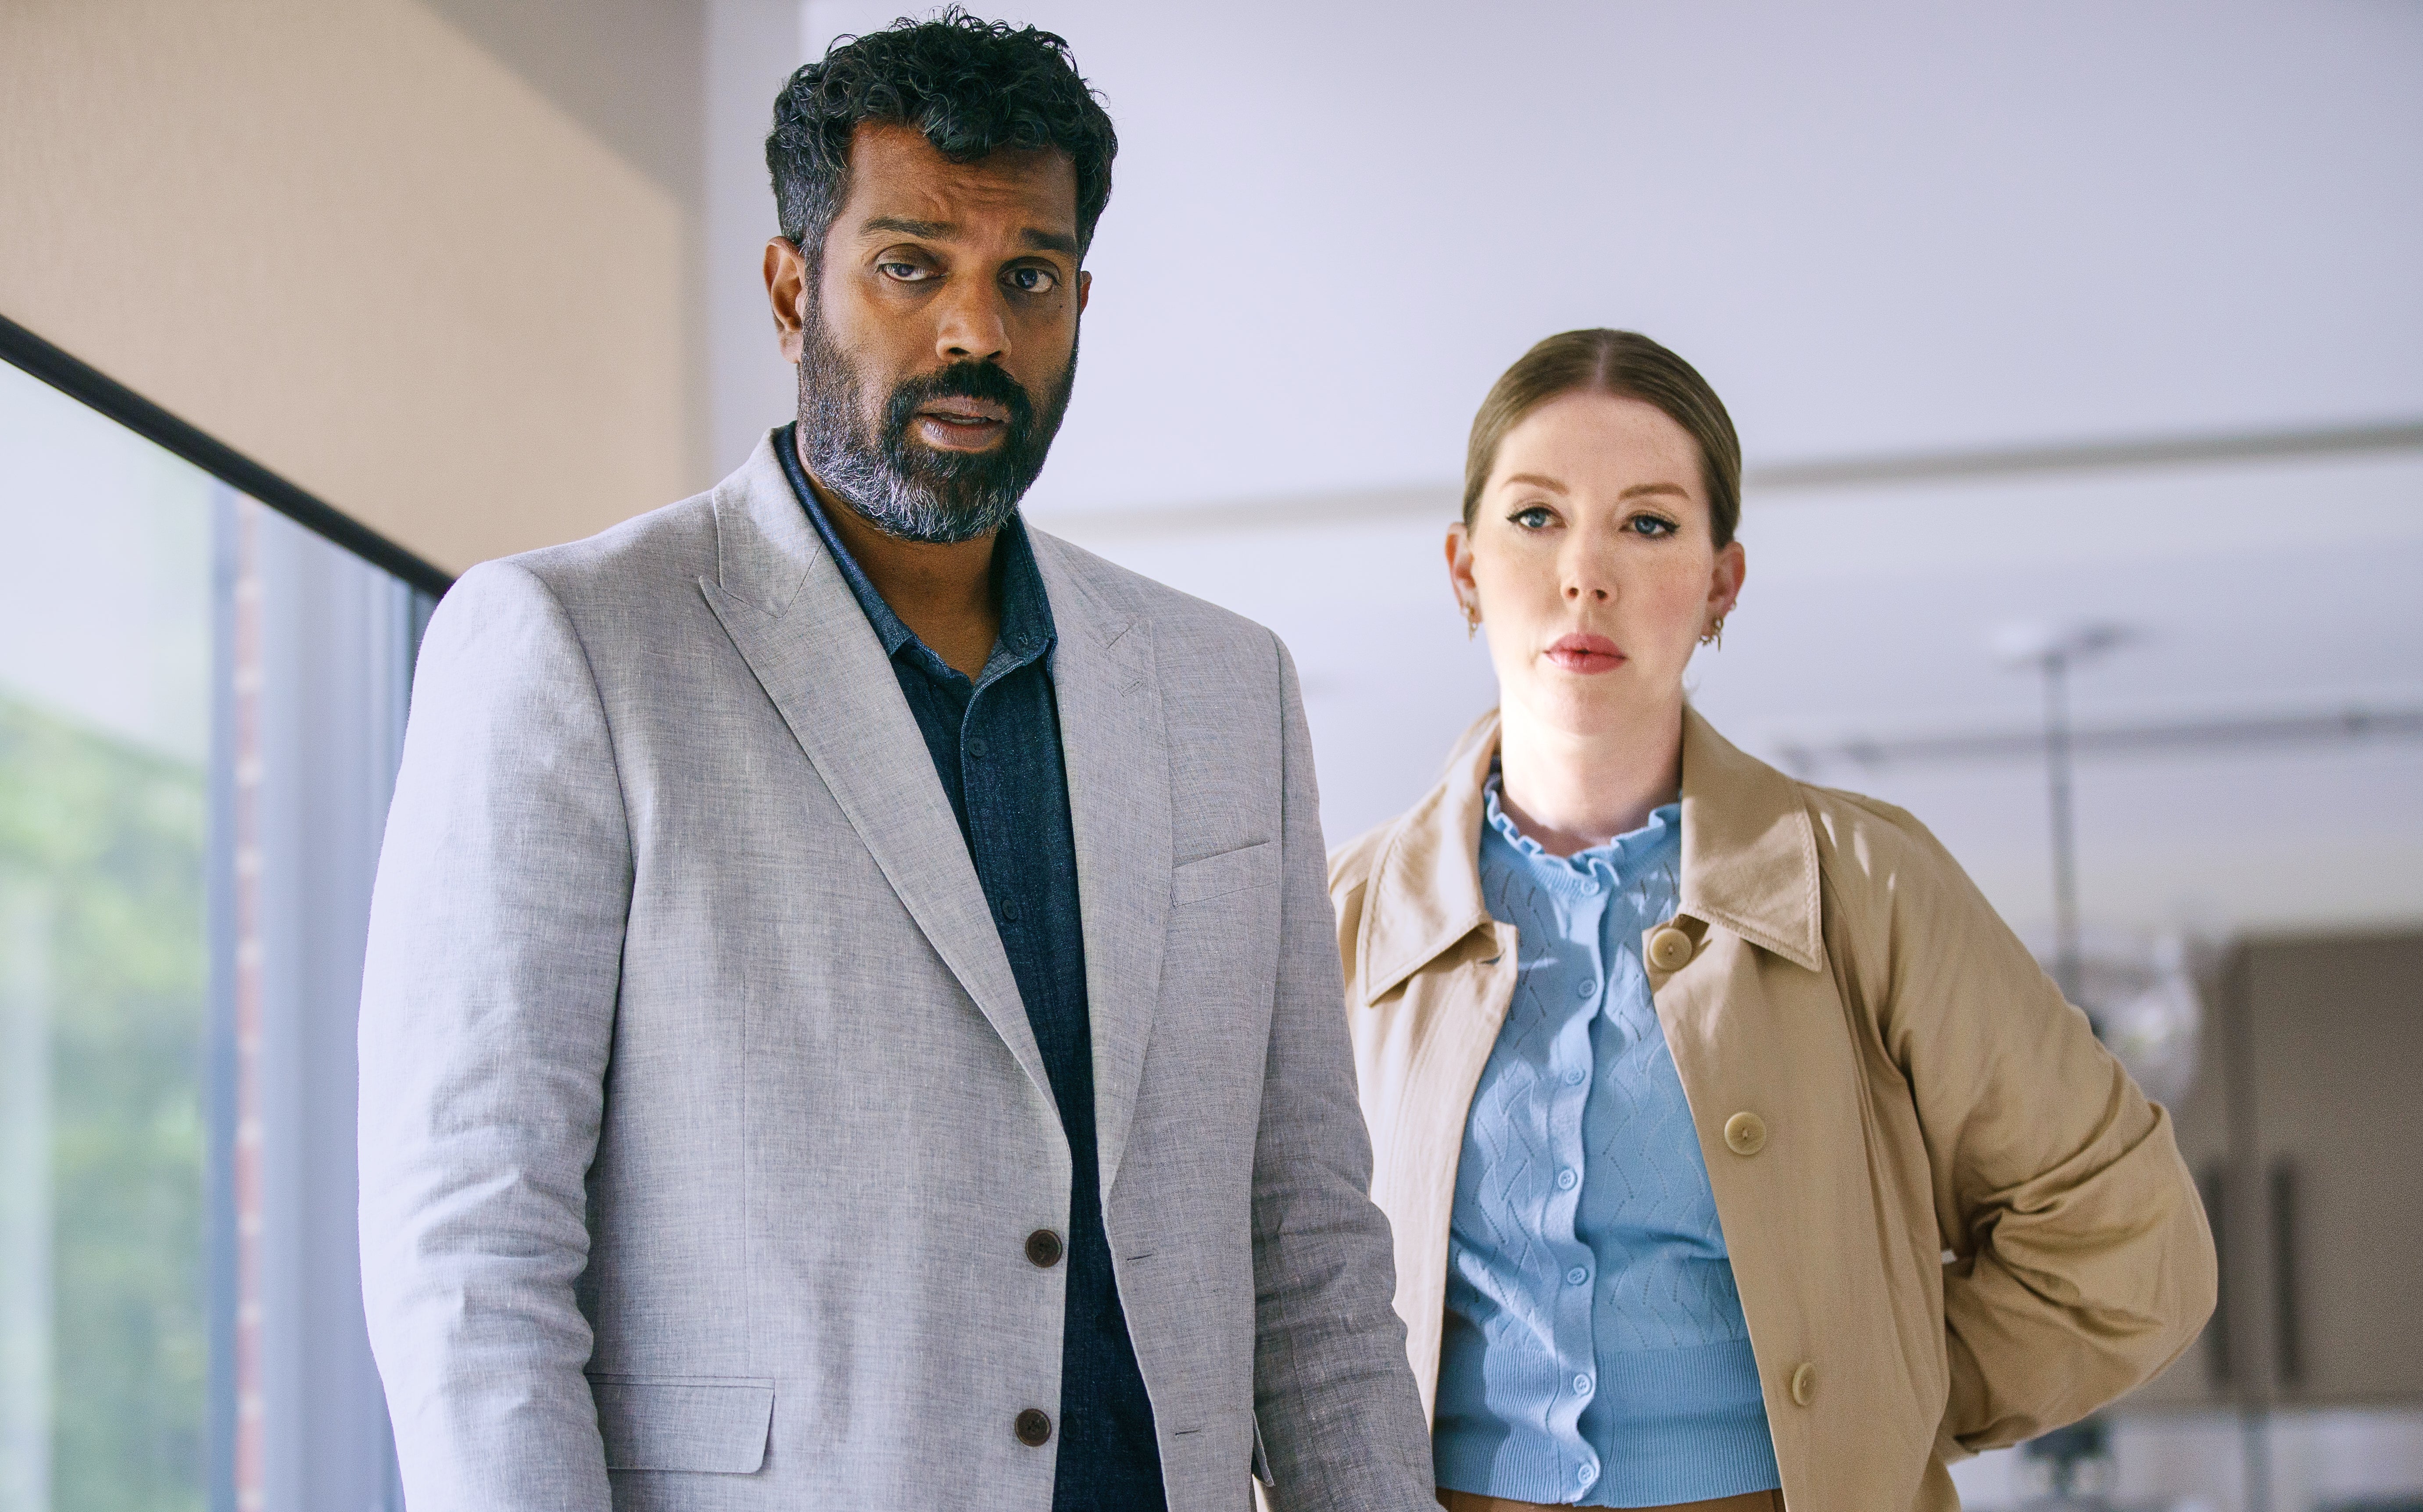 Romesh Ranganathan and Katherine Ryan star as Deacon and Allison, a couple struggling to afford private IVF